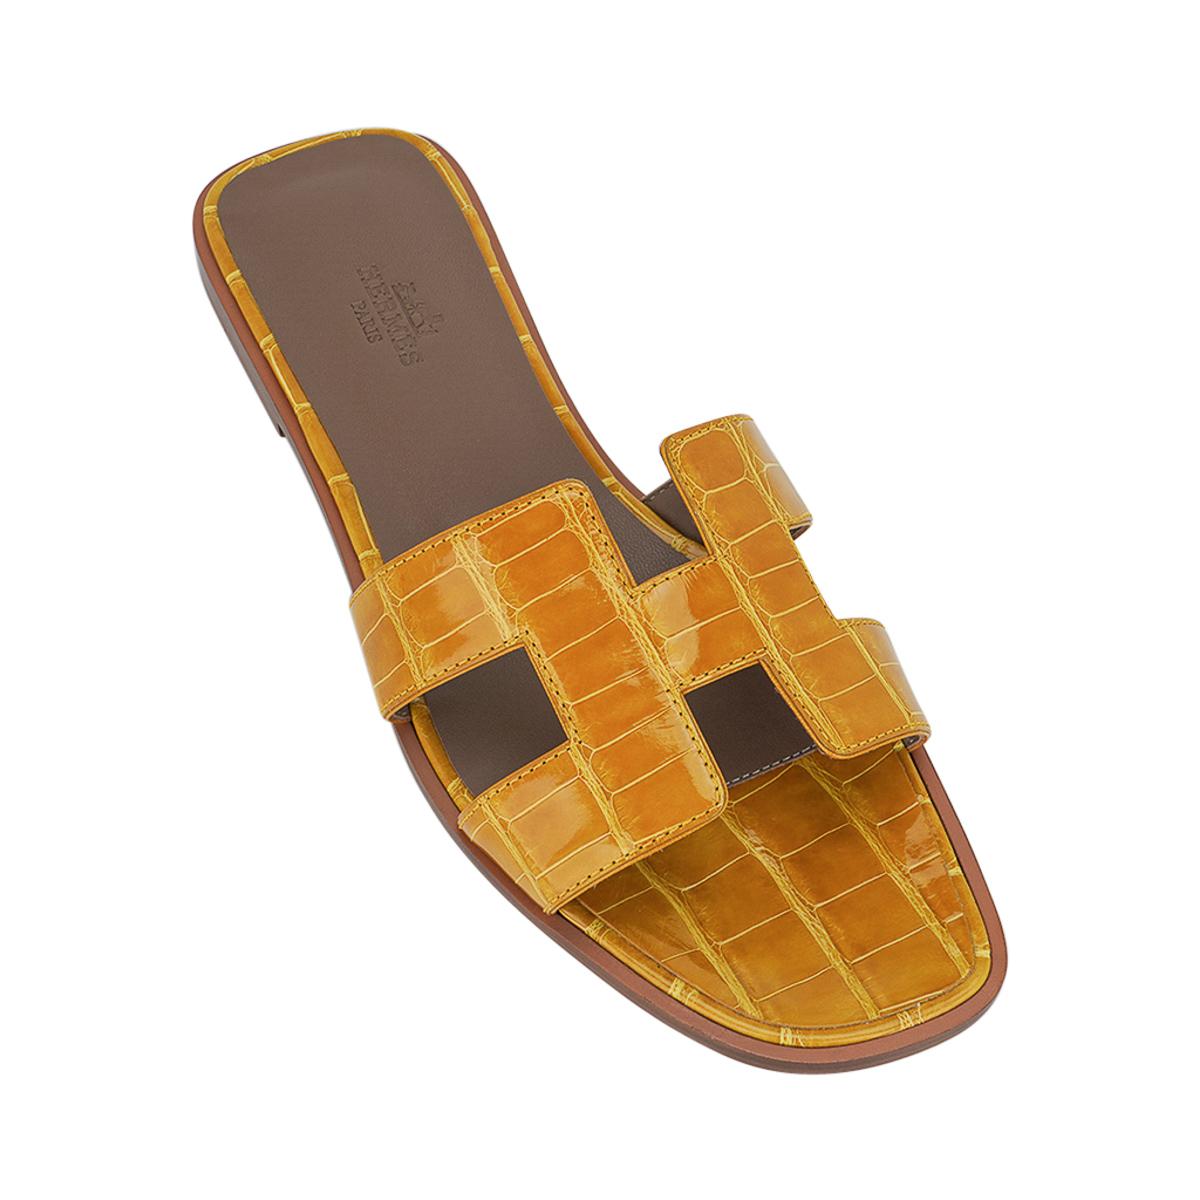 Mightychic offers Hermes Oran sandals featured in Jaune Ambre Alligator.
This stunning limited edition Hermes Oran flat slide sandal is a warm honeyed yellow.
The iconic H cutout over the top of the foot.
Embossed calfskin insole.
Wood heel with